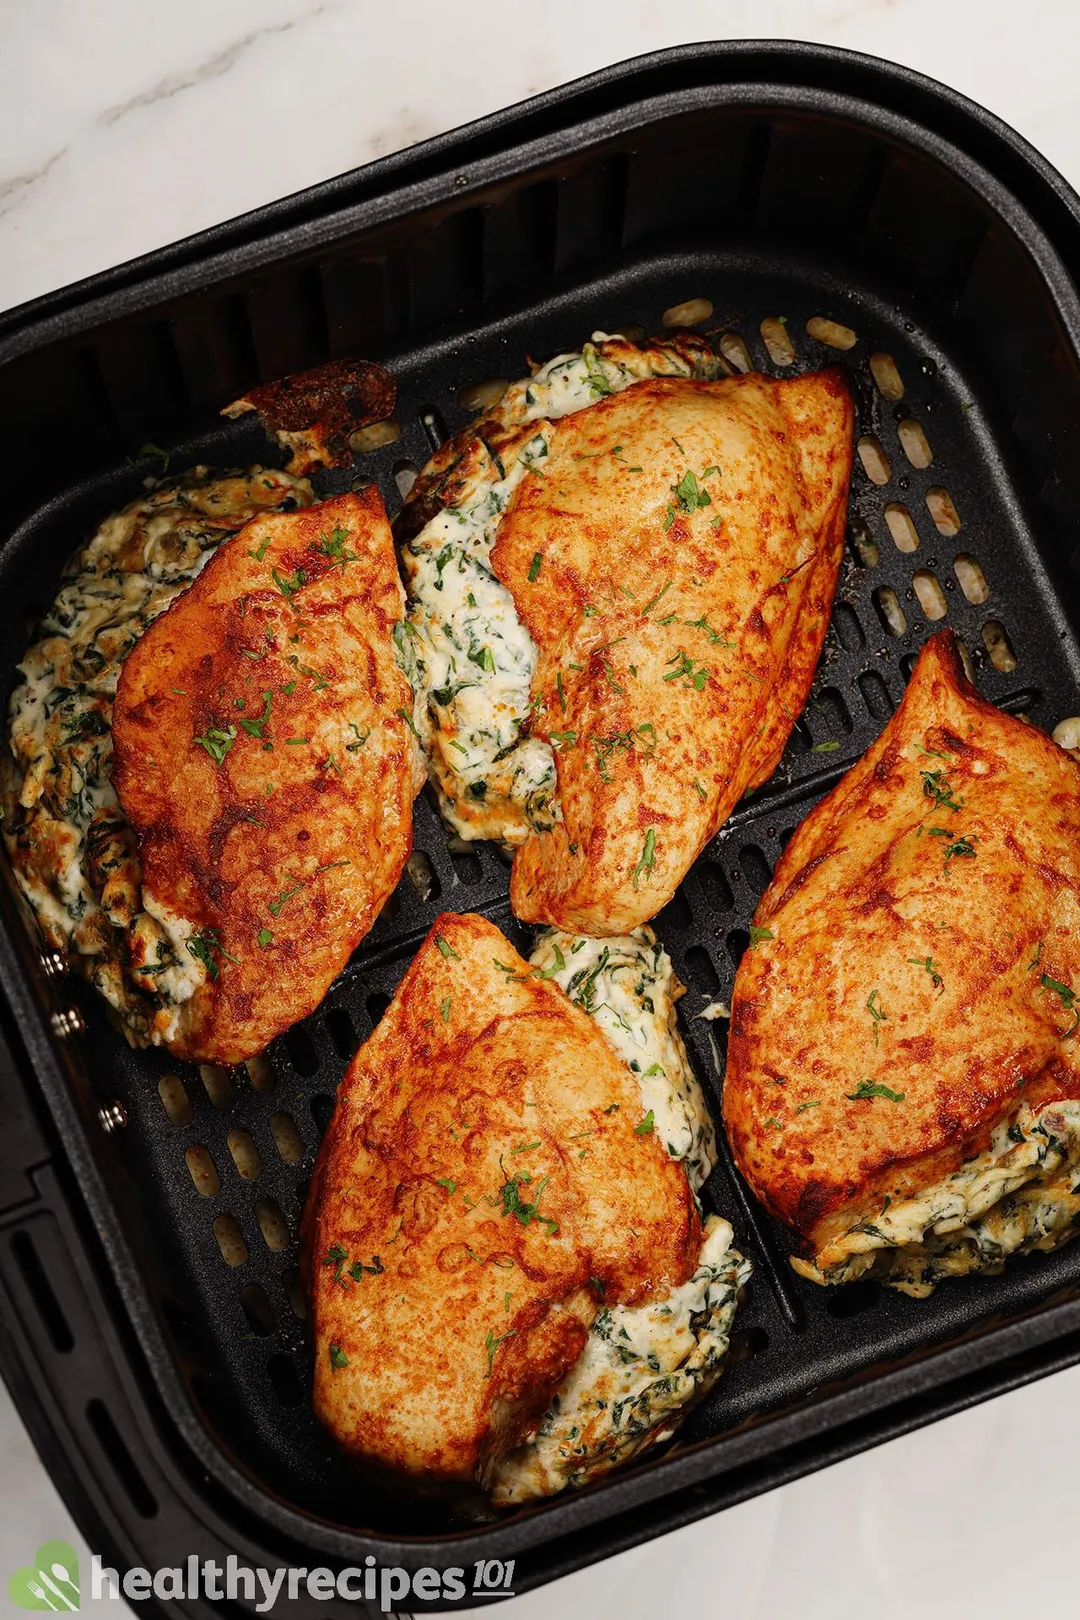 four cooked chicken breasts in air fryer basket